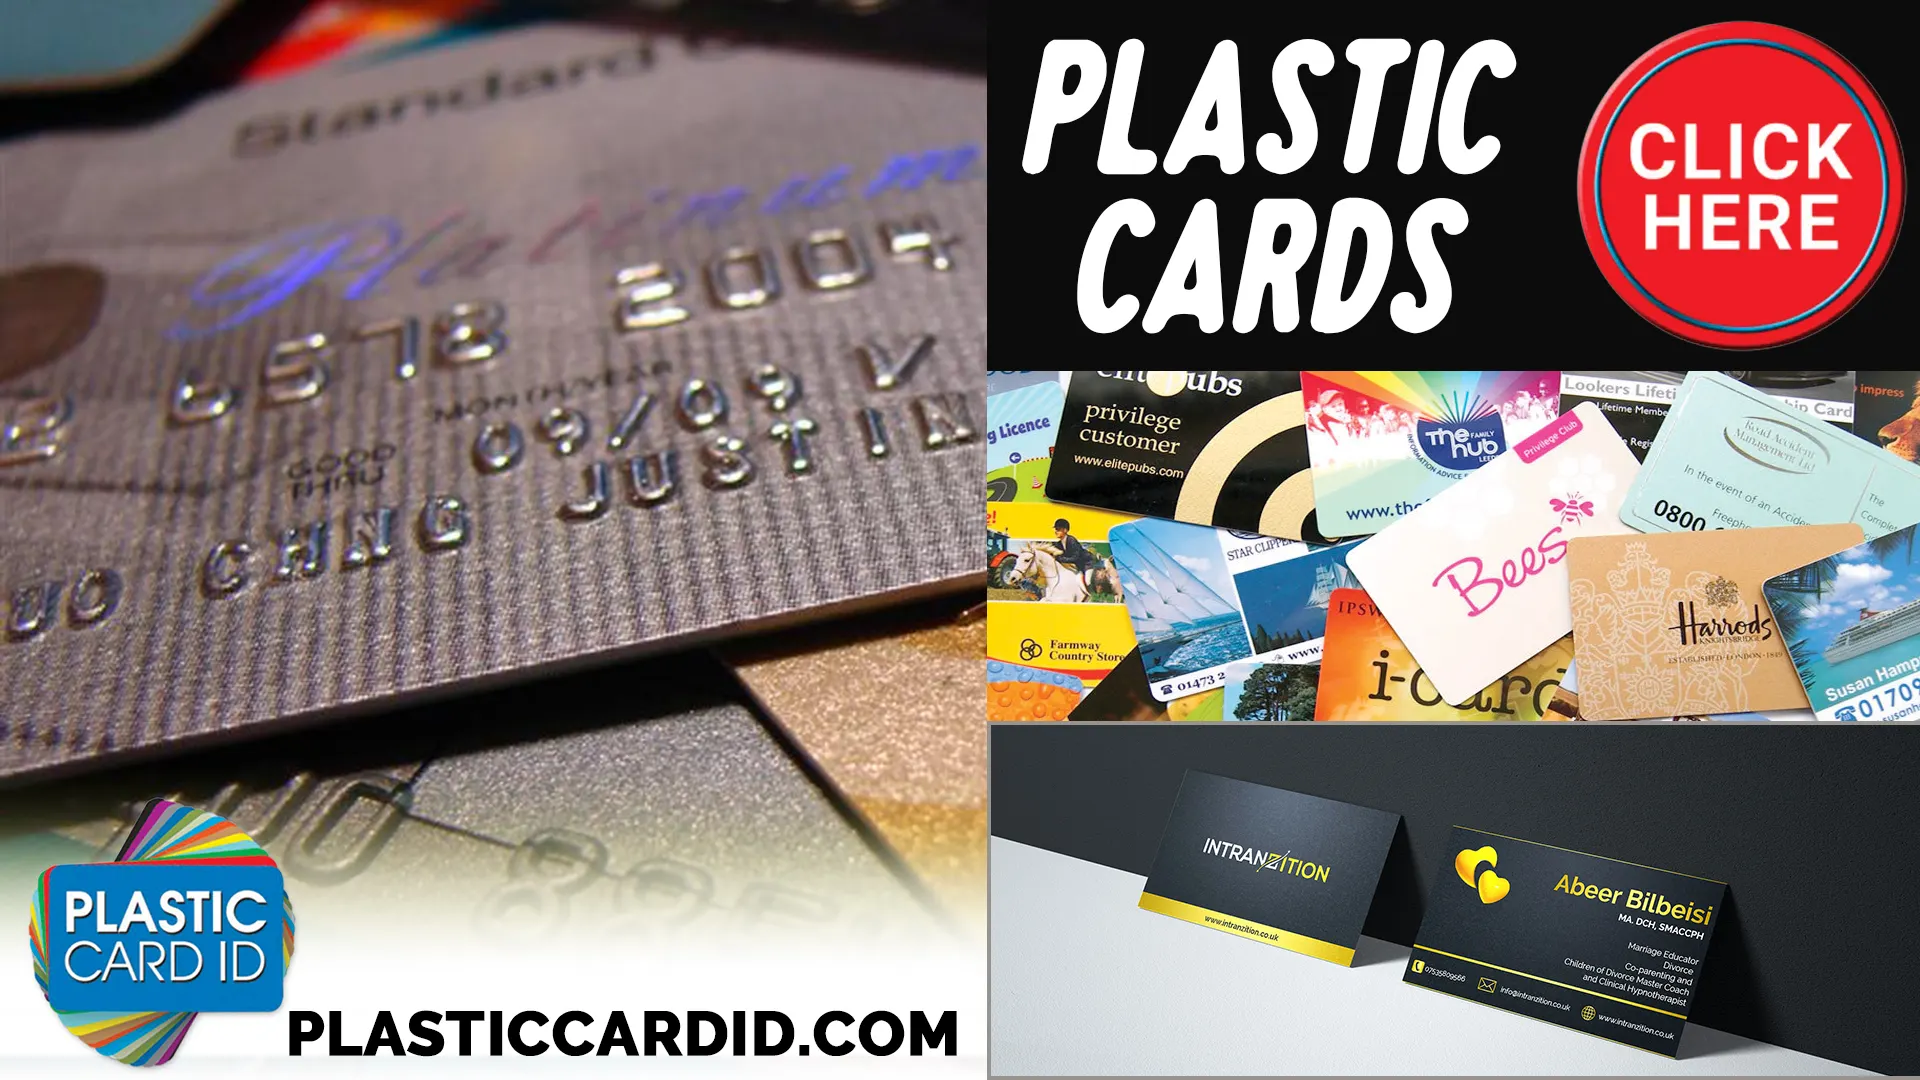 Welcome to Plastic Card ID
: Where Innovation Meets Sustainability in Card Production